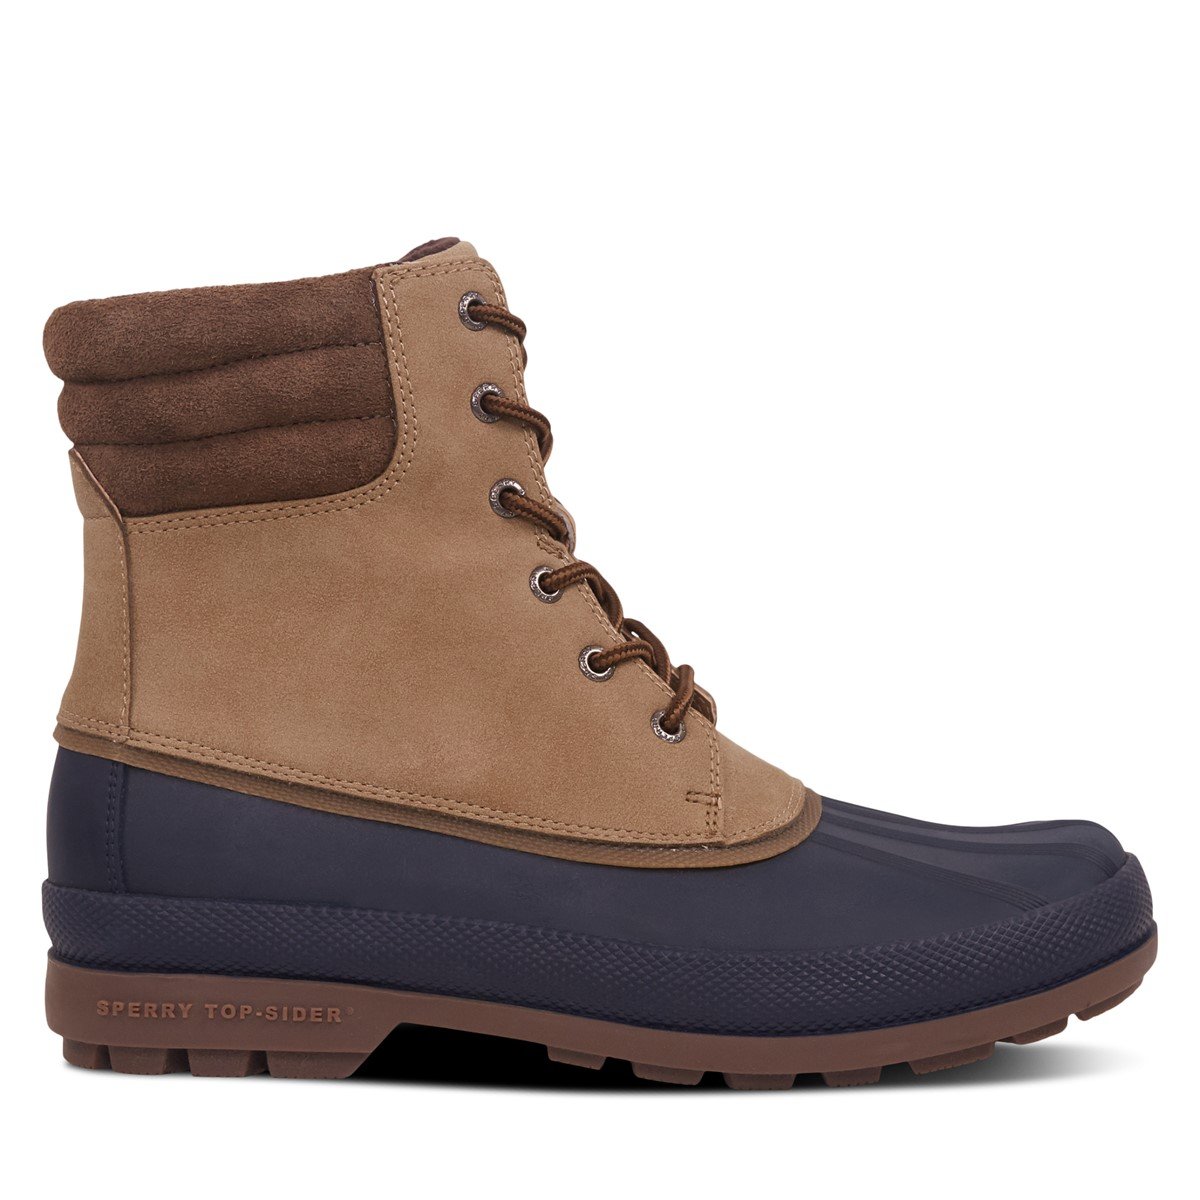 Men's Cold Bay Duck Boots in Taupe/Navy